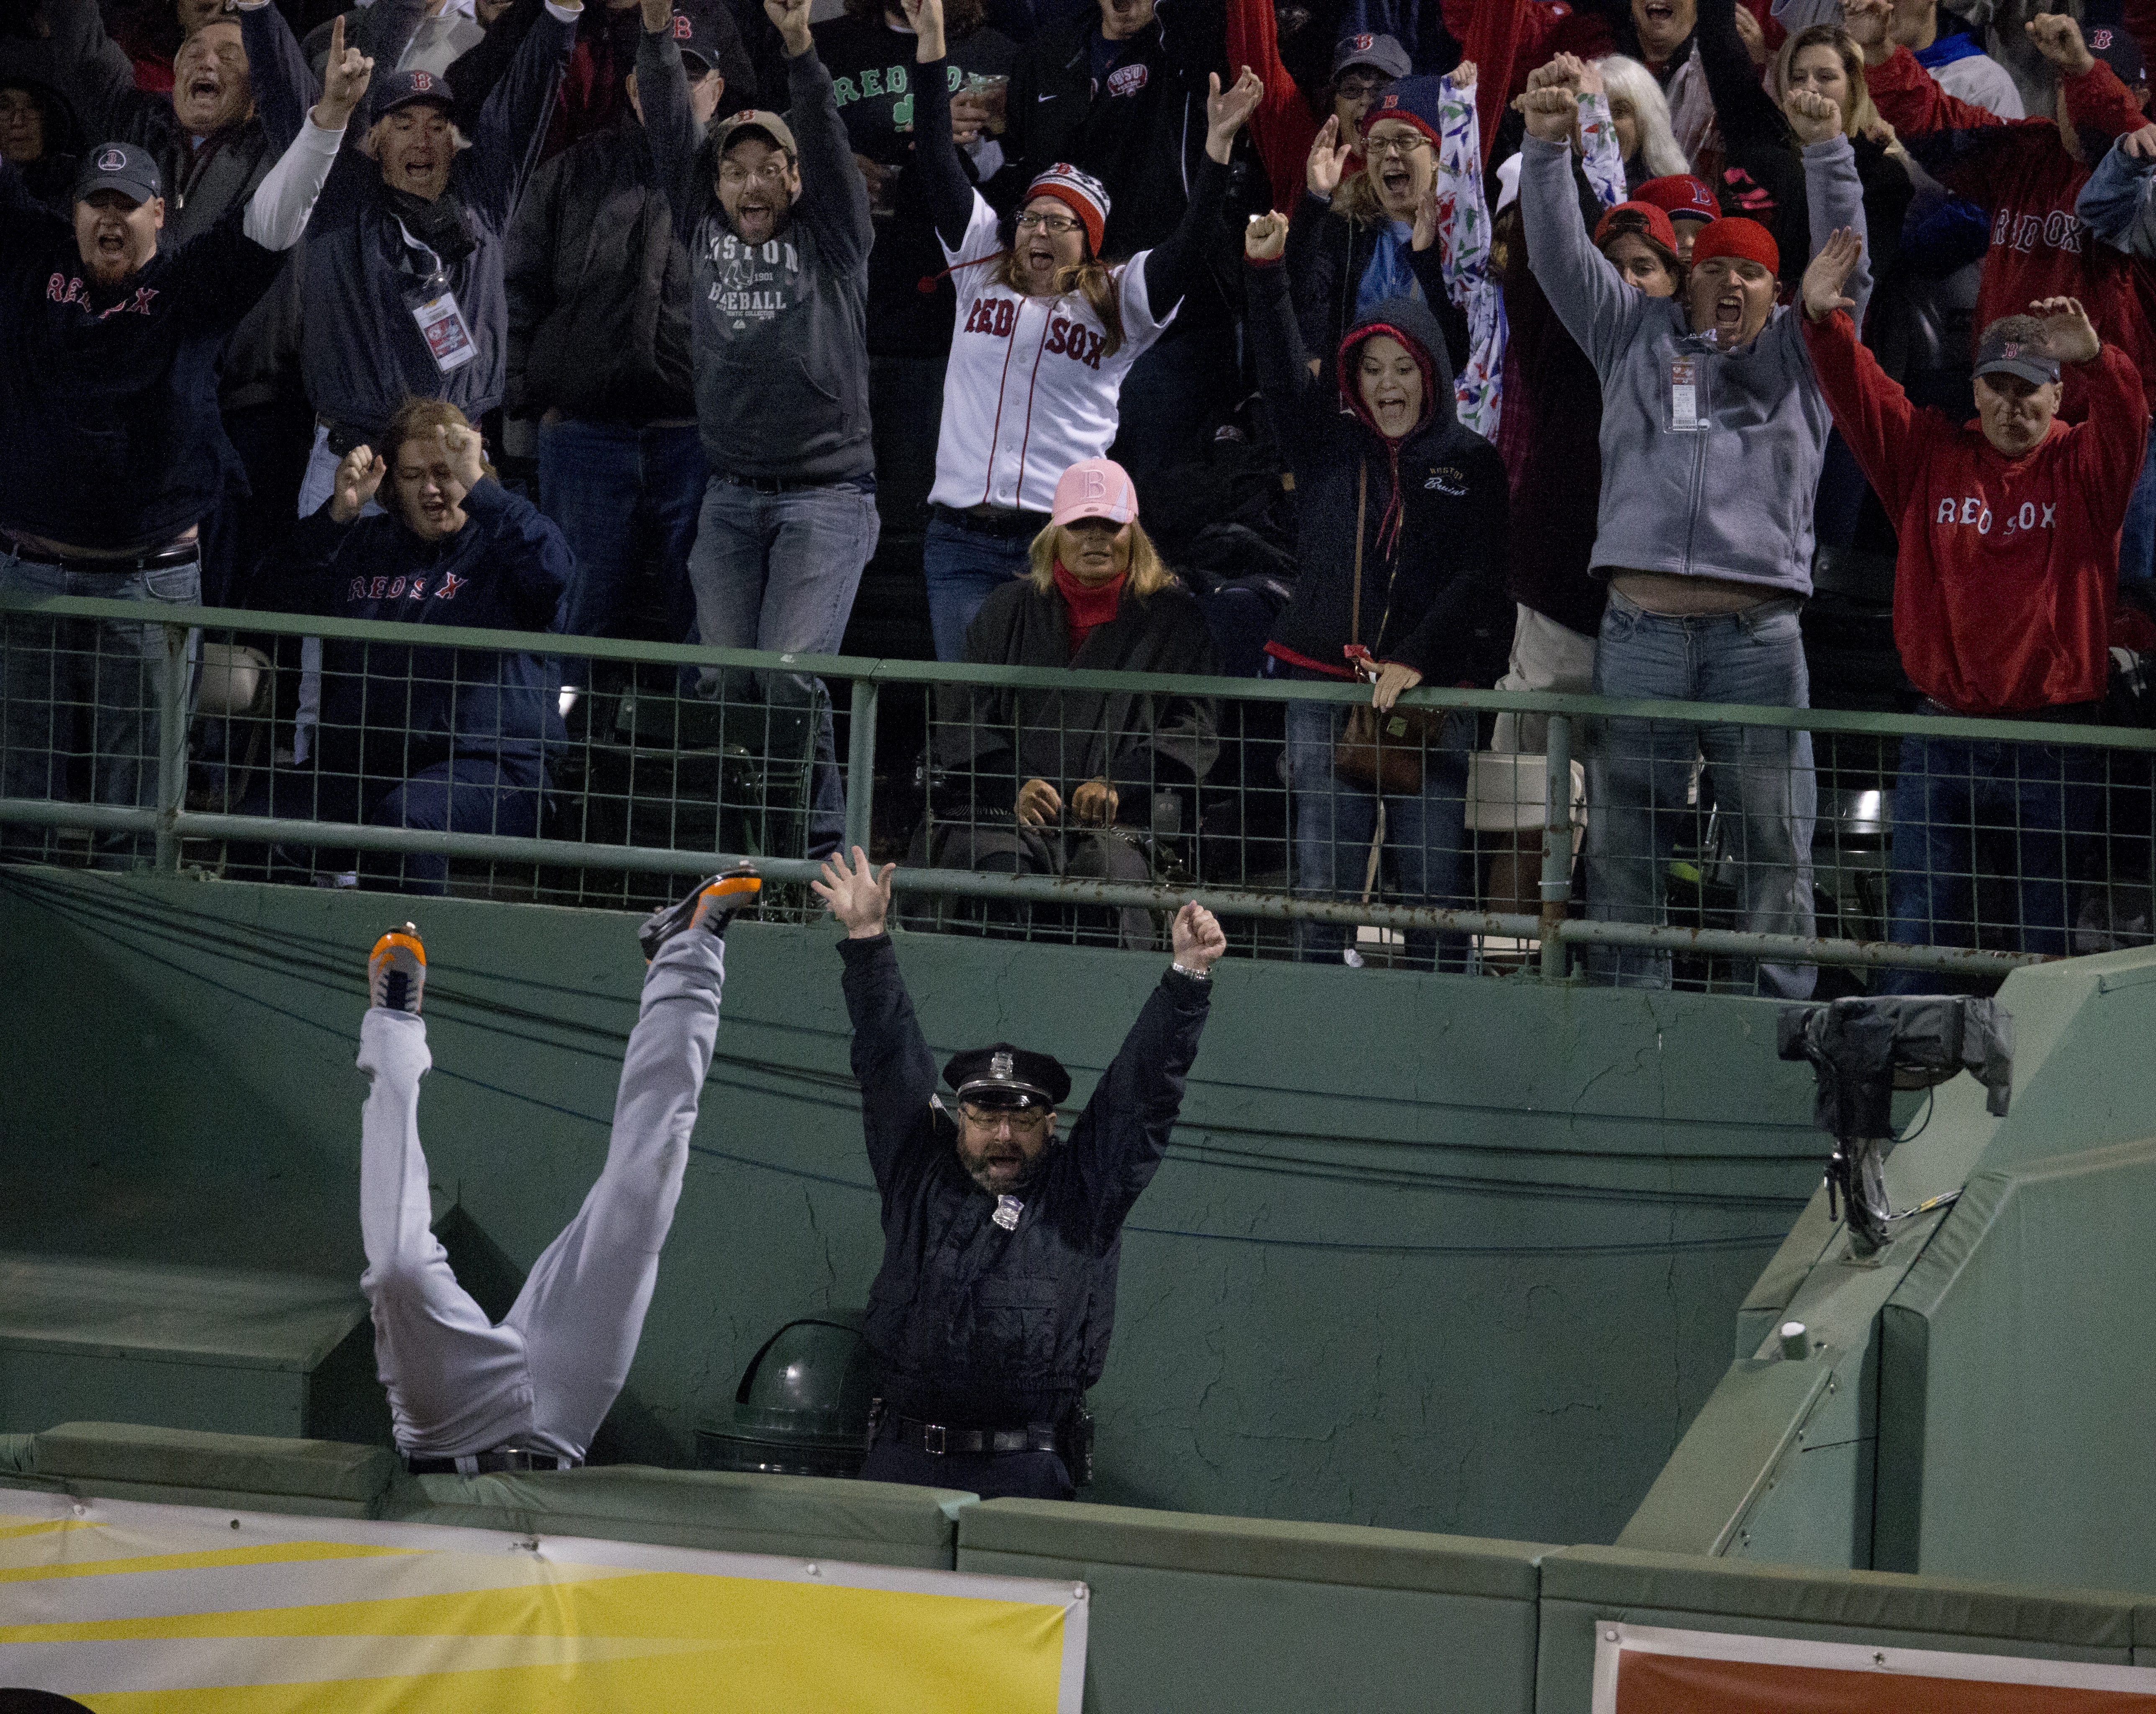 Who could forget this moment? Torii Hunter flipped into the bullpen while failing to grab an Ortiz homer in the eighth inning of Game 2 of the ALCS against the Tigers Oct. 13.